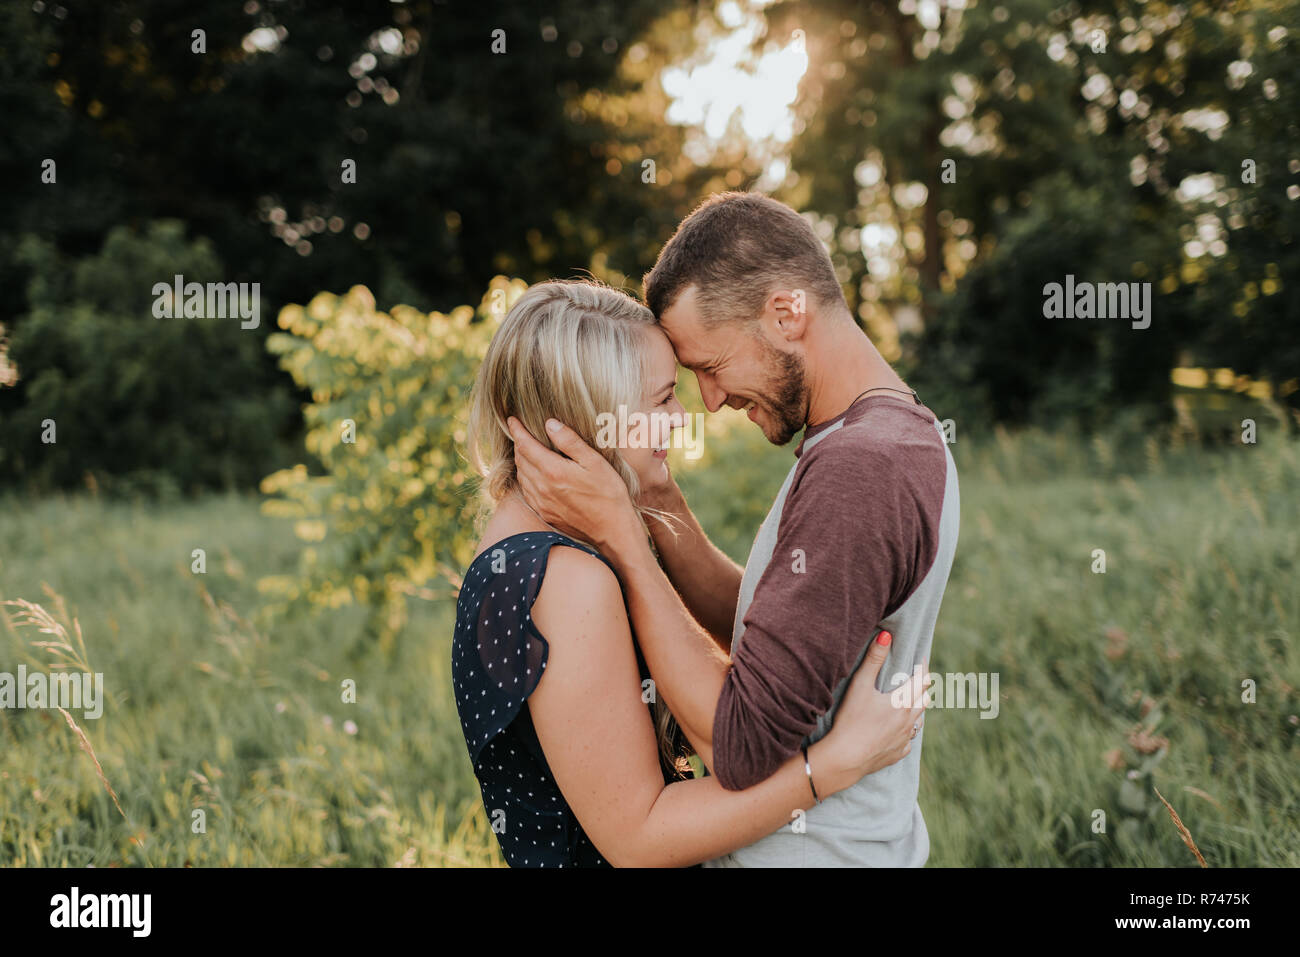 Romantic young woman and boyfriend face to face in field at sunset Stock Photo